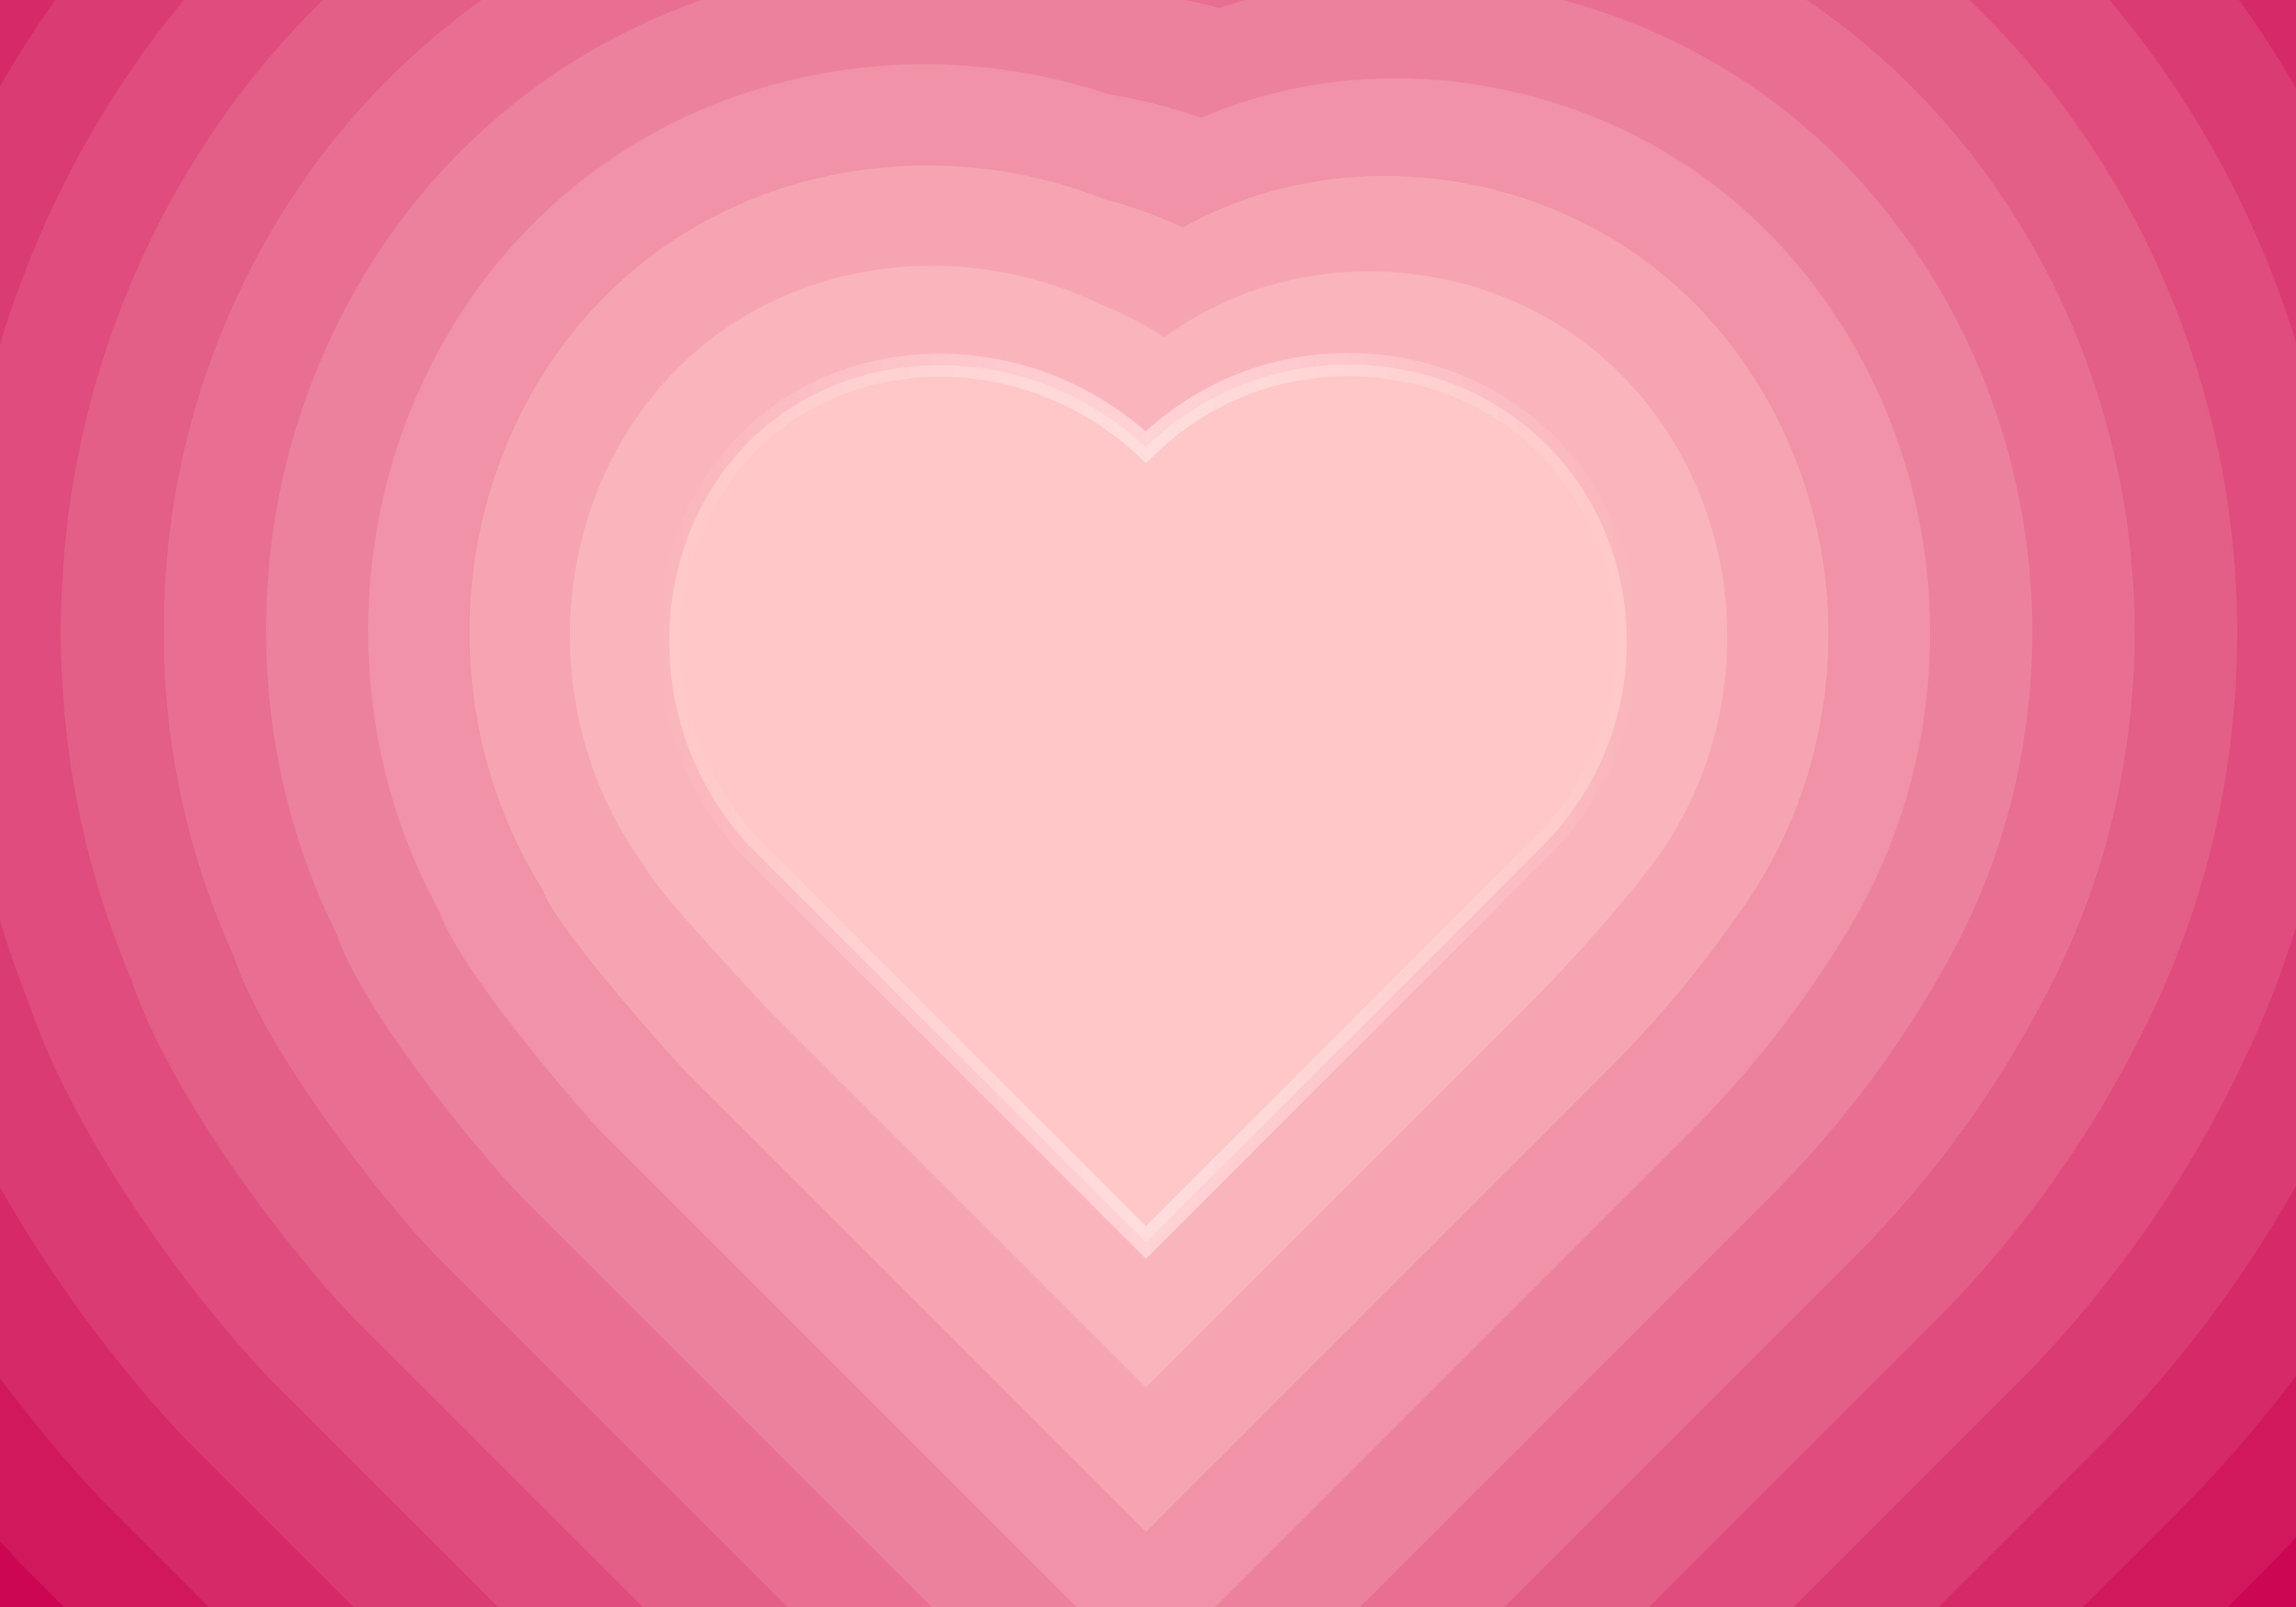 Concentric hearts pink gradient background